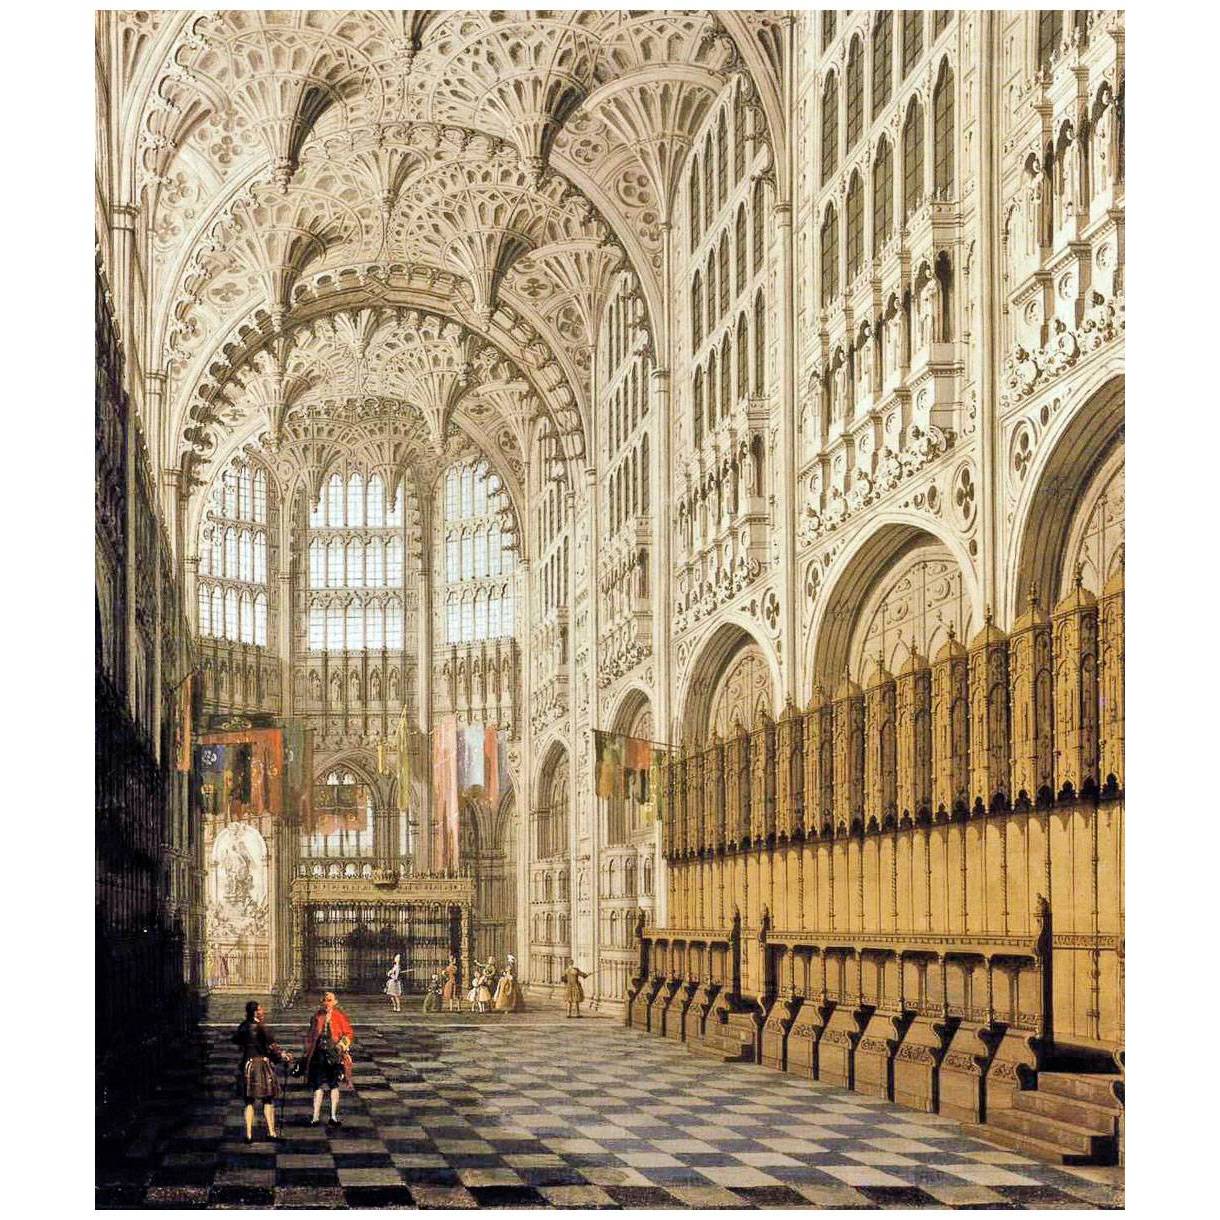 Canaletto. The Interior of Westminster Abbey. 1753. Museum of London